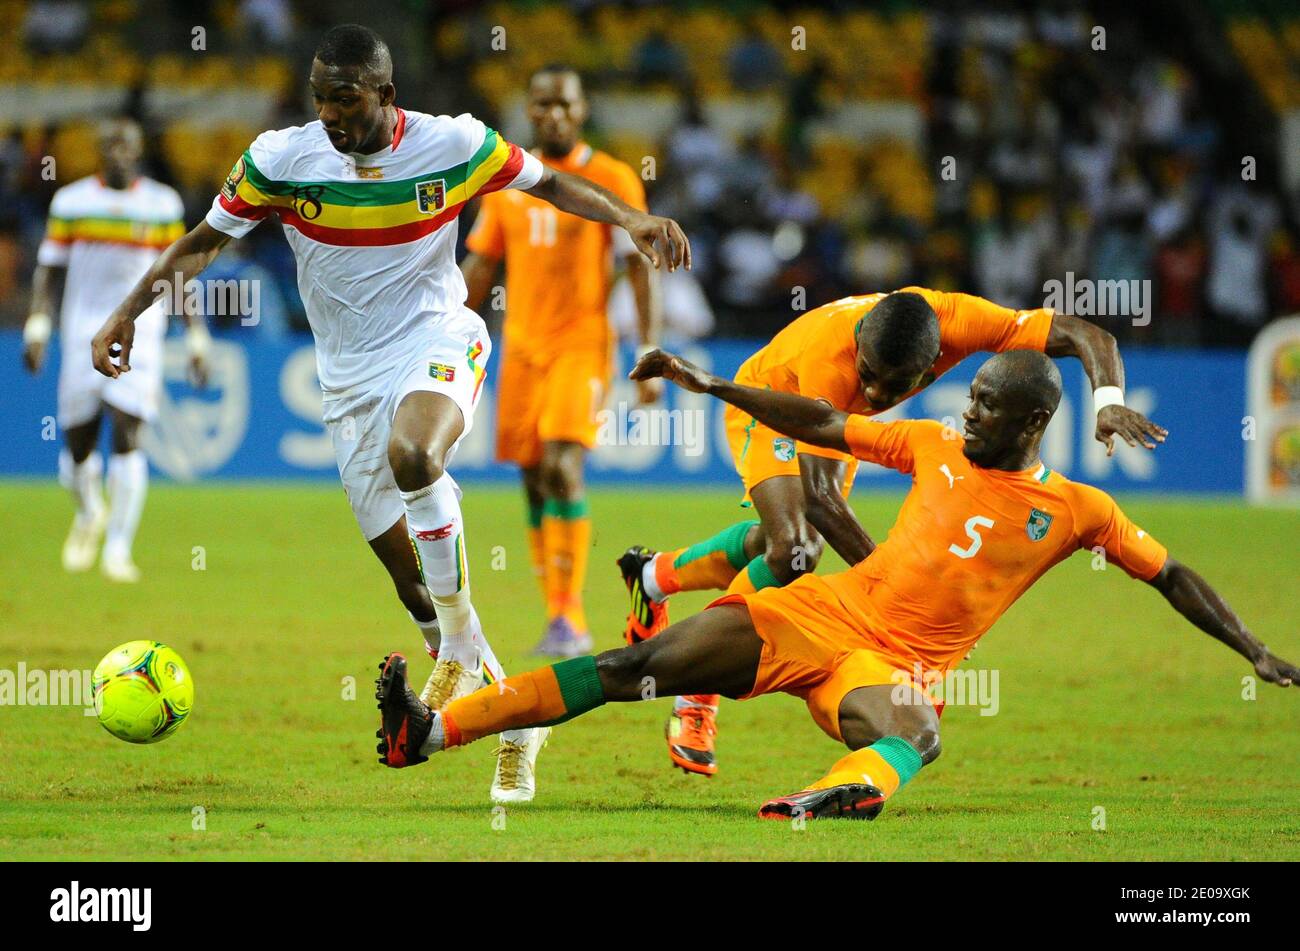 Mali's Samba Sow and Ivory Coast's Didier Zokora during the 2012 African Cup of Nations, Semi-Final, Mali Vs Ivory Coast at the stade de l'amitie in Libreville, Gabon on February 8, 2012. Ivory Coast won 1-0. Photo by ABACXAPRESS.COM Stock Photo